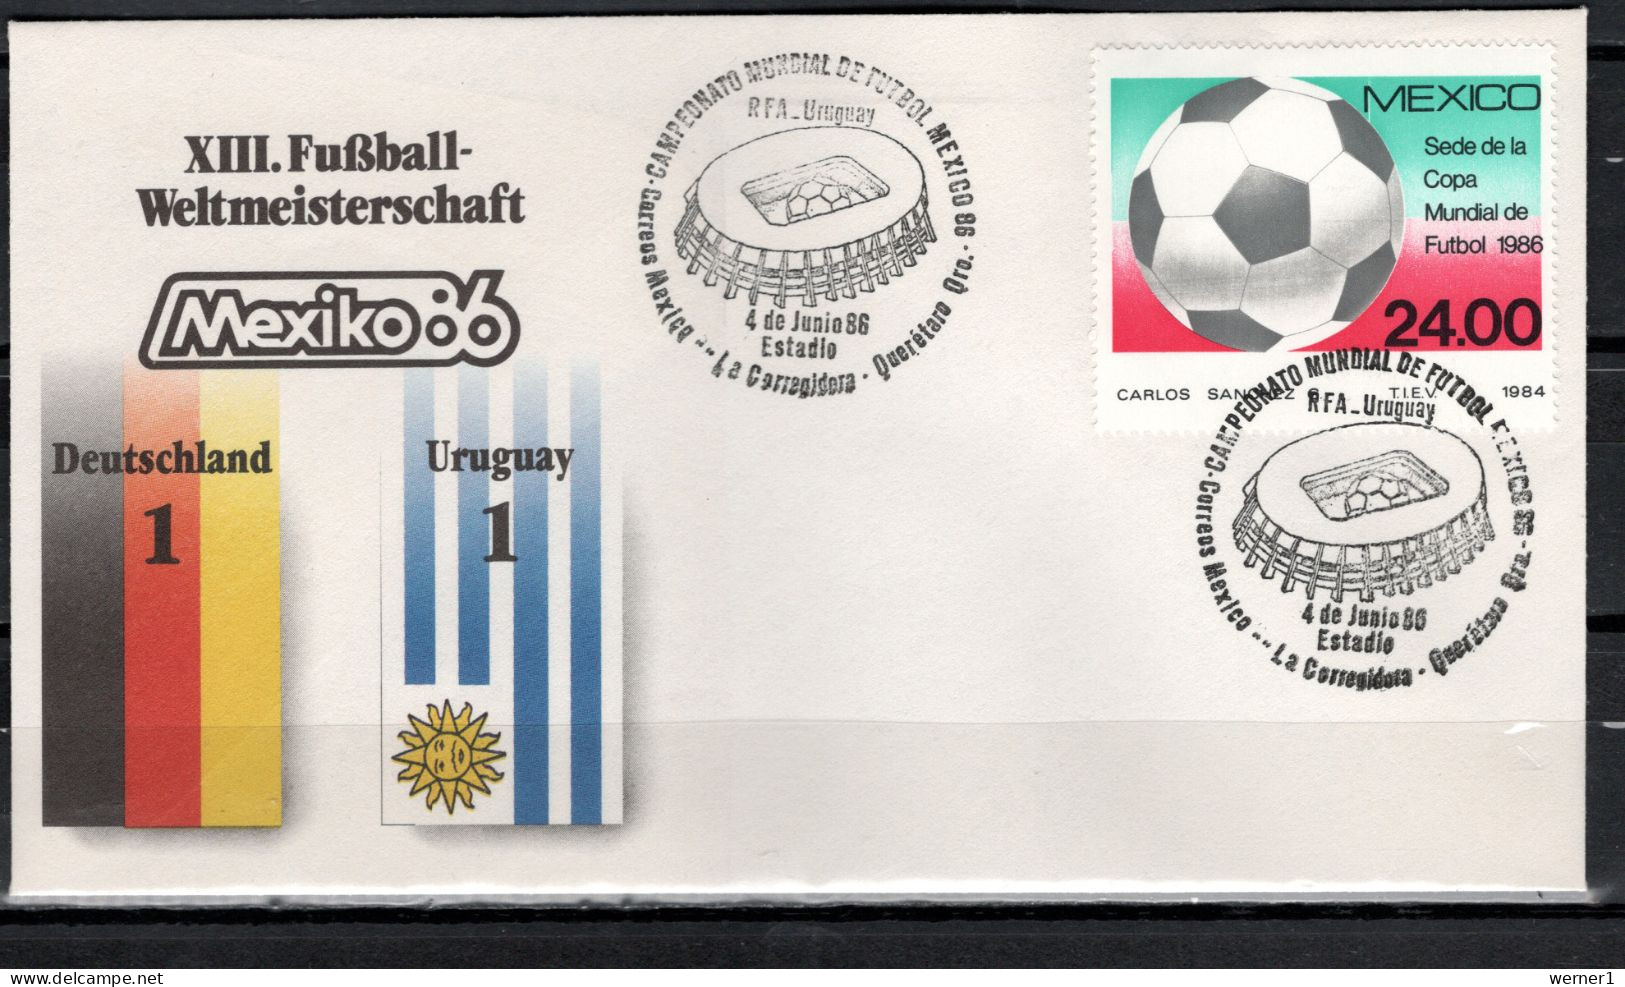 Mexico 1986 Football Soccer World Cup Commemorative Cover Match Germany - Uruguay 1 : 1 - 1986 – Messico